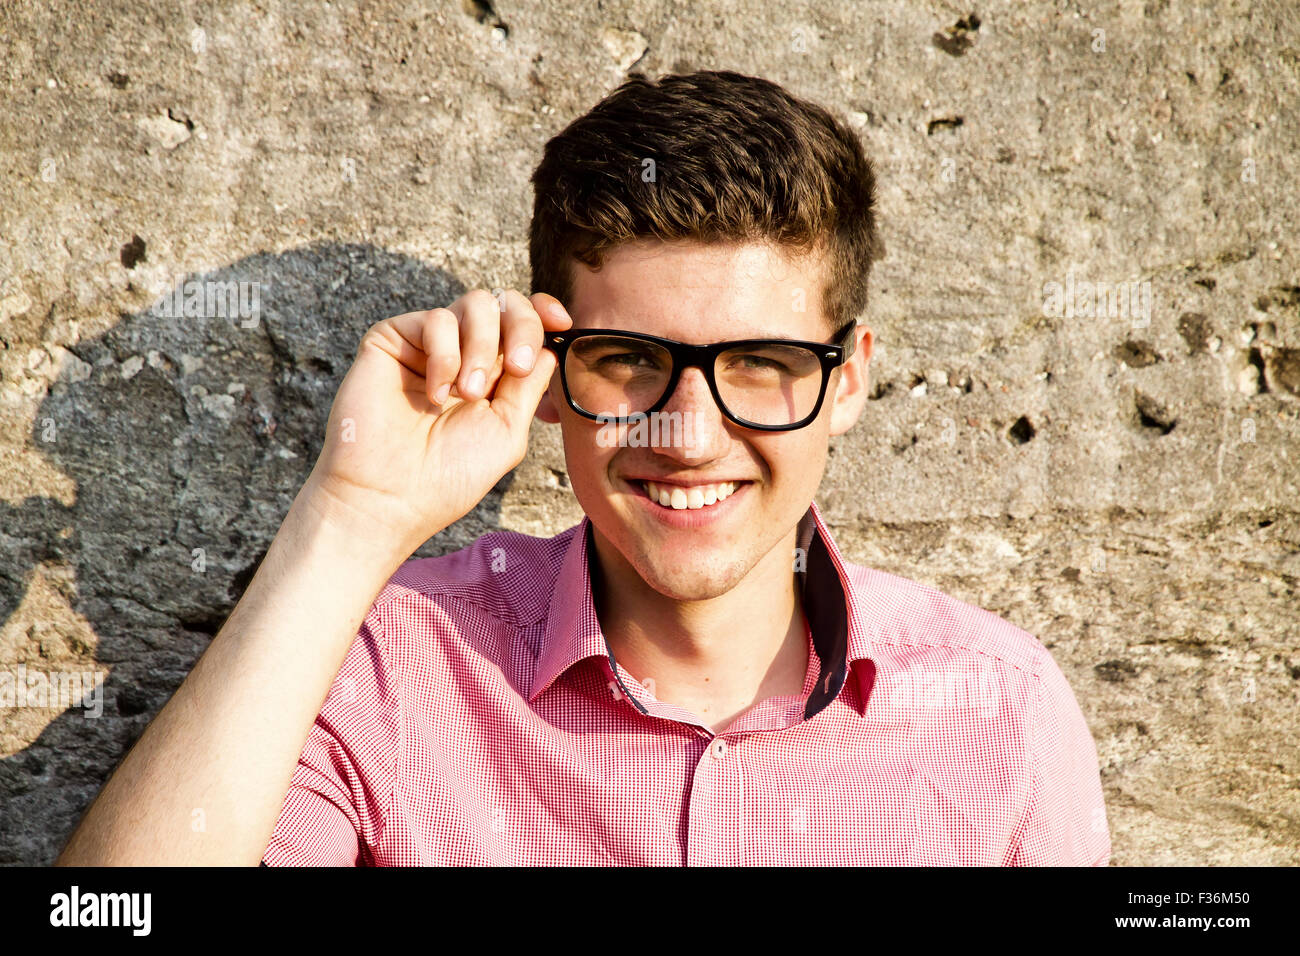 Portrait of young friendly man with glasses Stock Photo